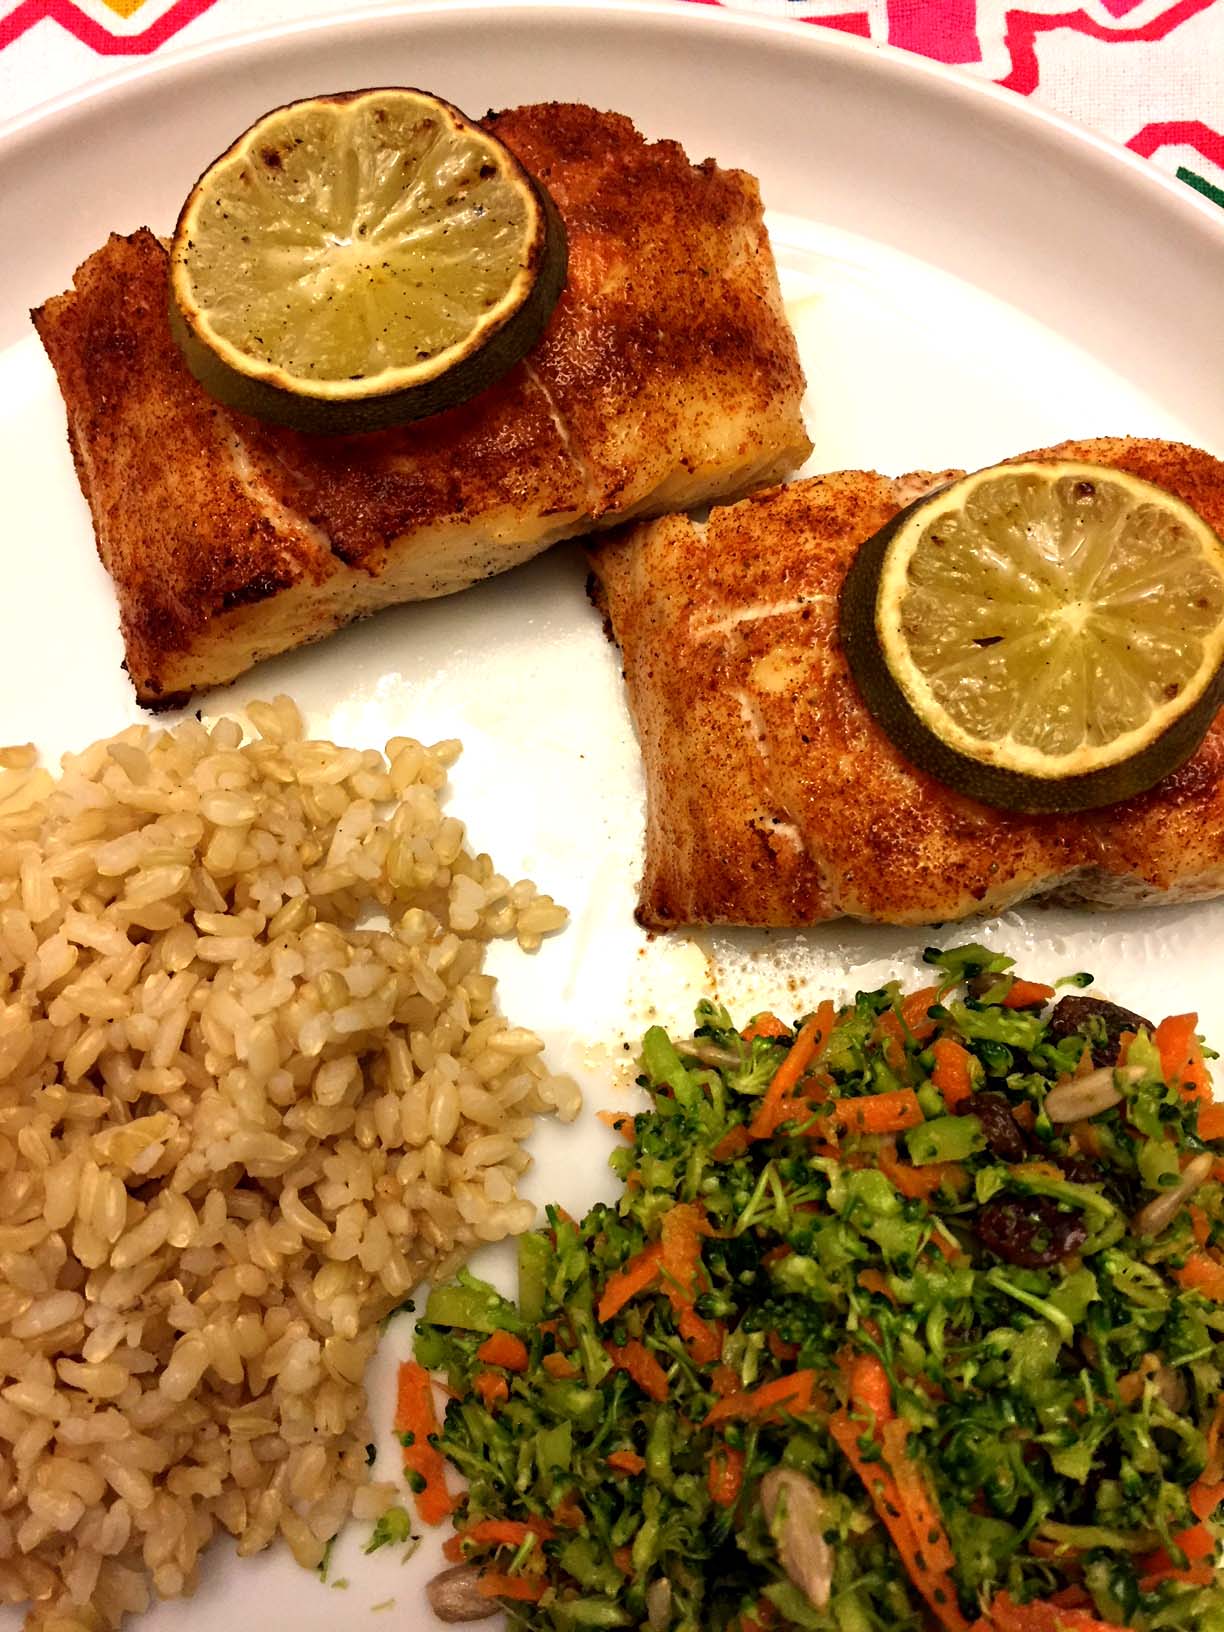 Baked Red Snapper Fillets With Chili And Lime Melanie Cooks,1 12 Scale Chart